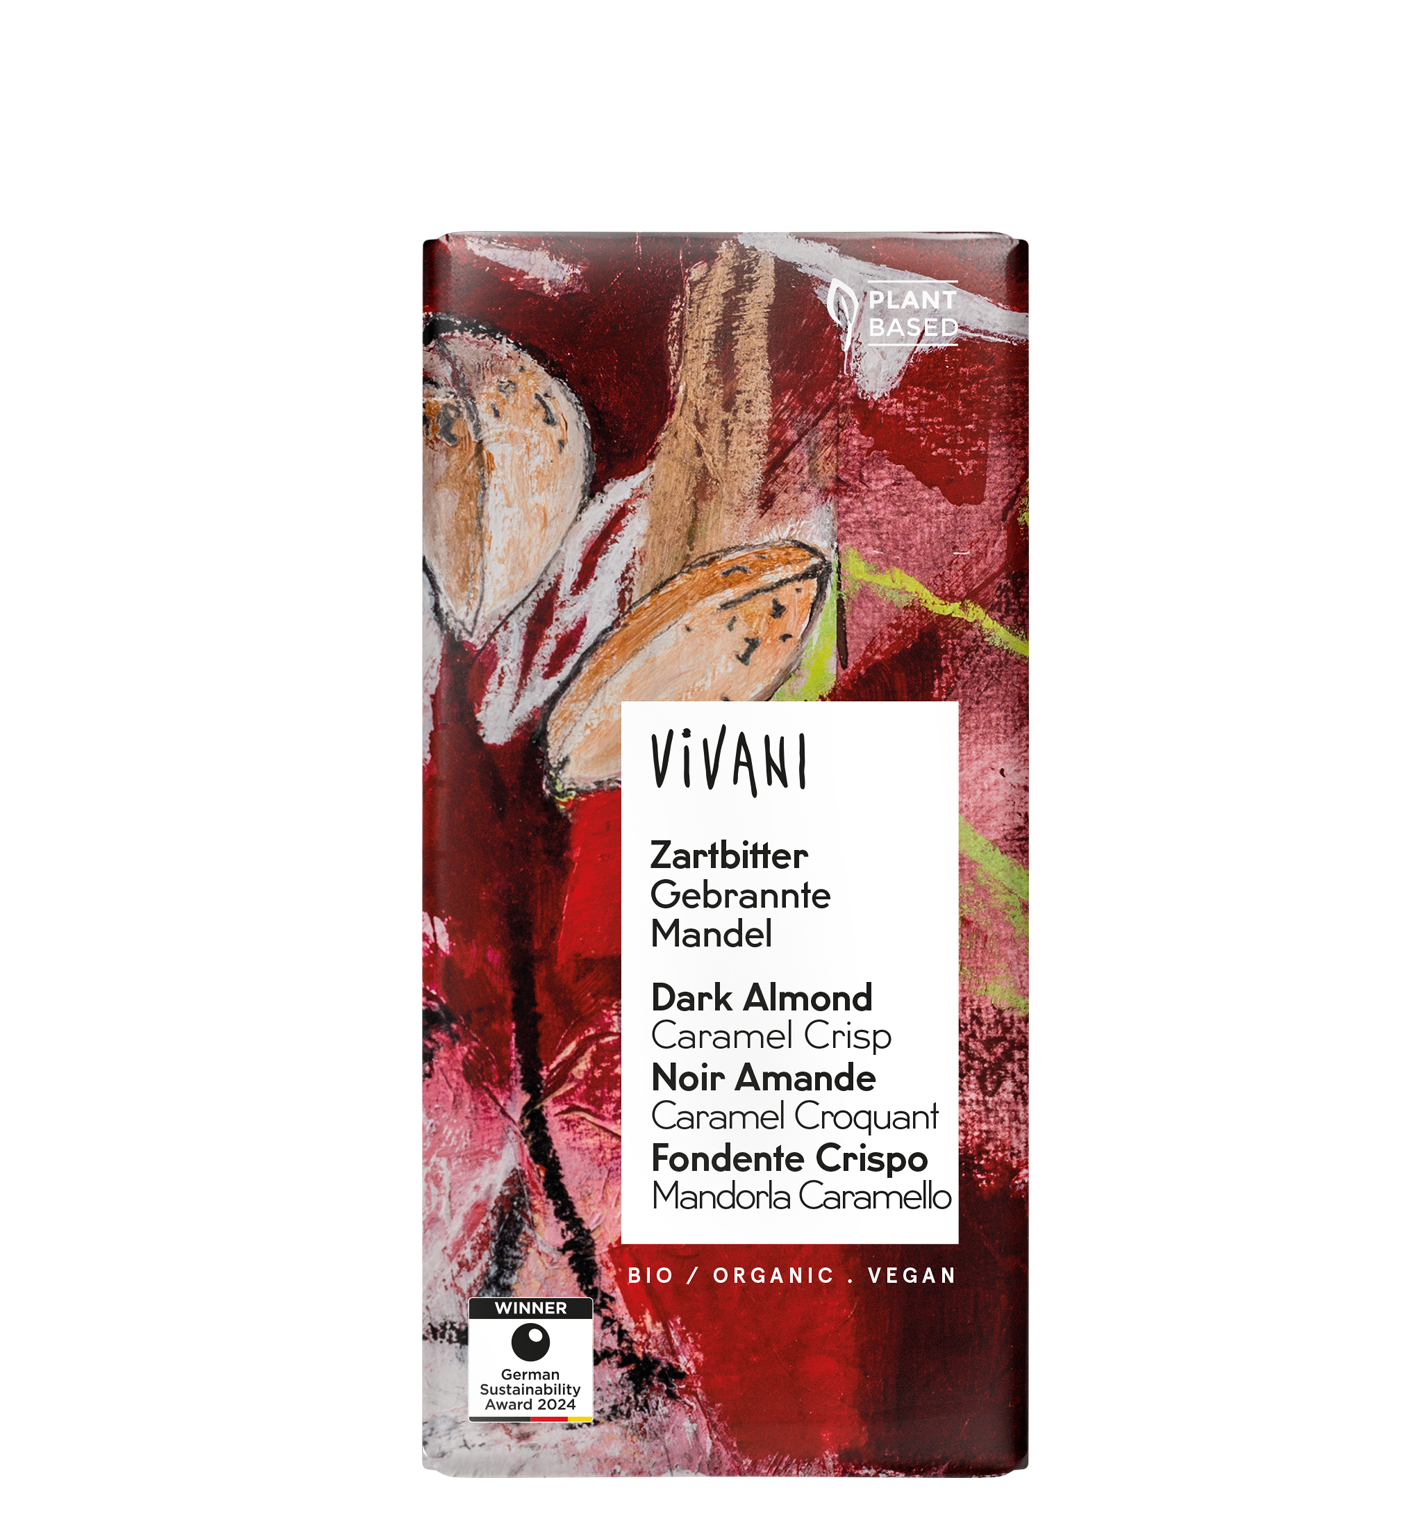 VIVANI’s organic and vegan dark chocolate with almonds, caramel crisp and spices for Christmas